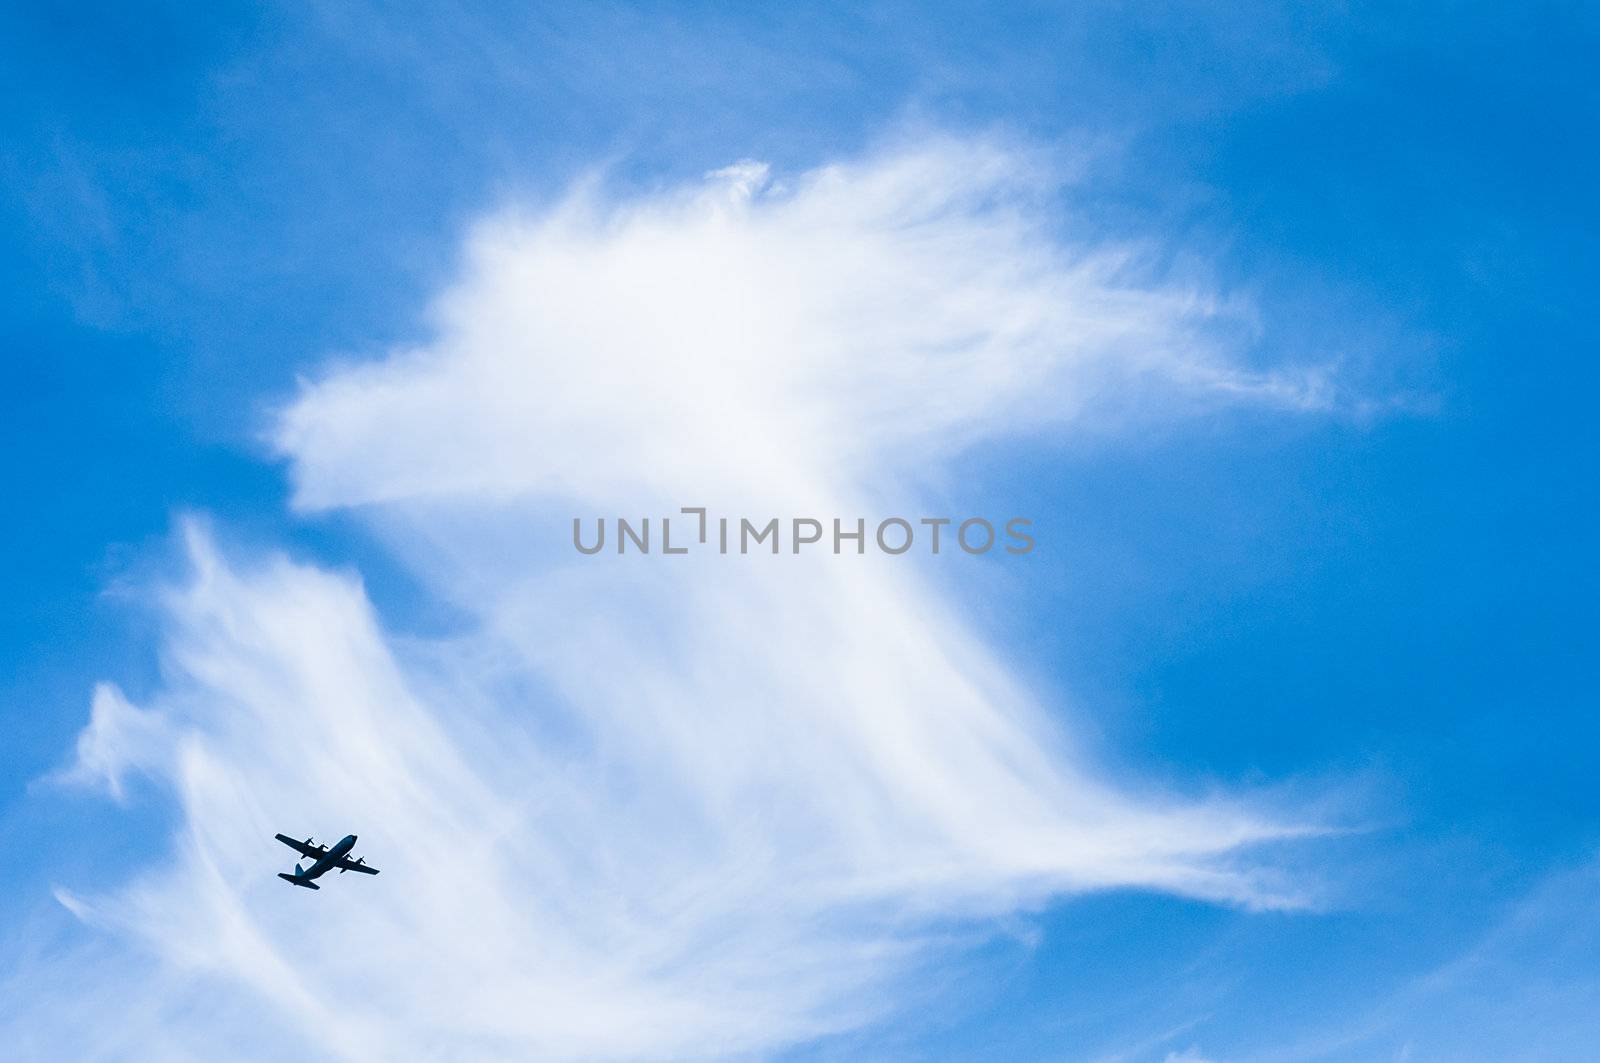 An airplane (aircraft)  flying in the blue sky